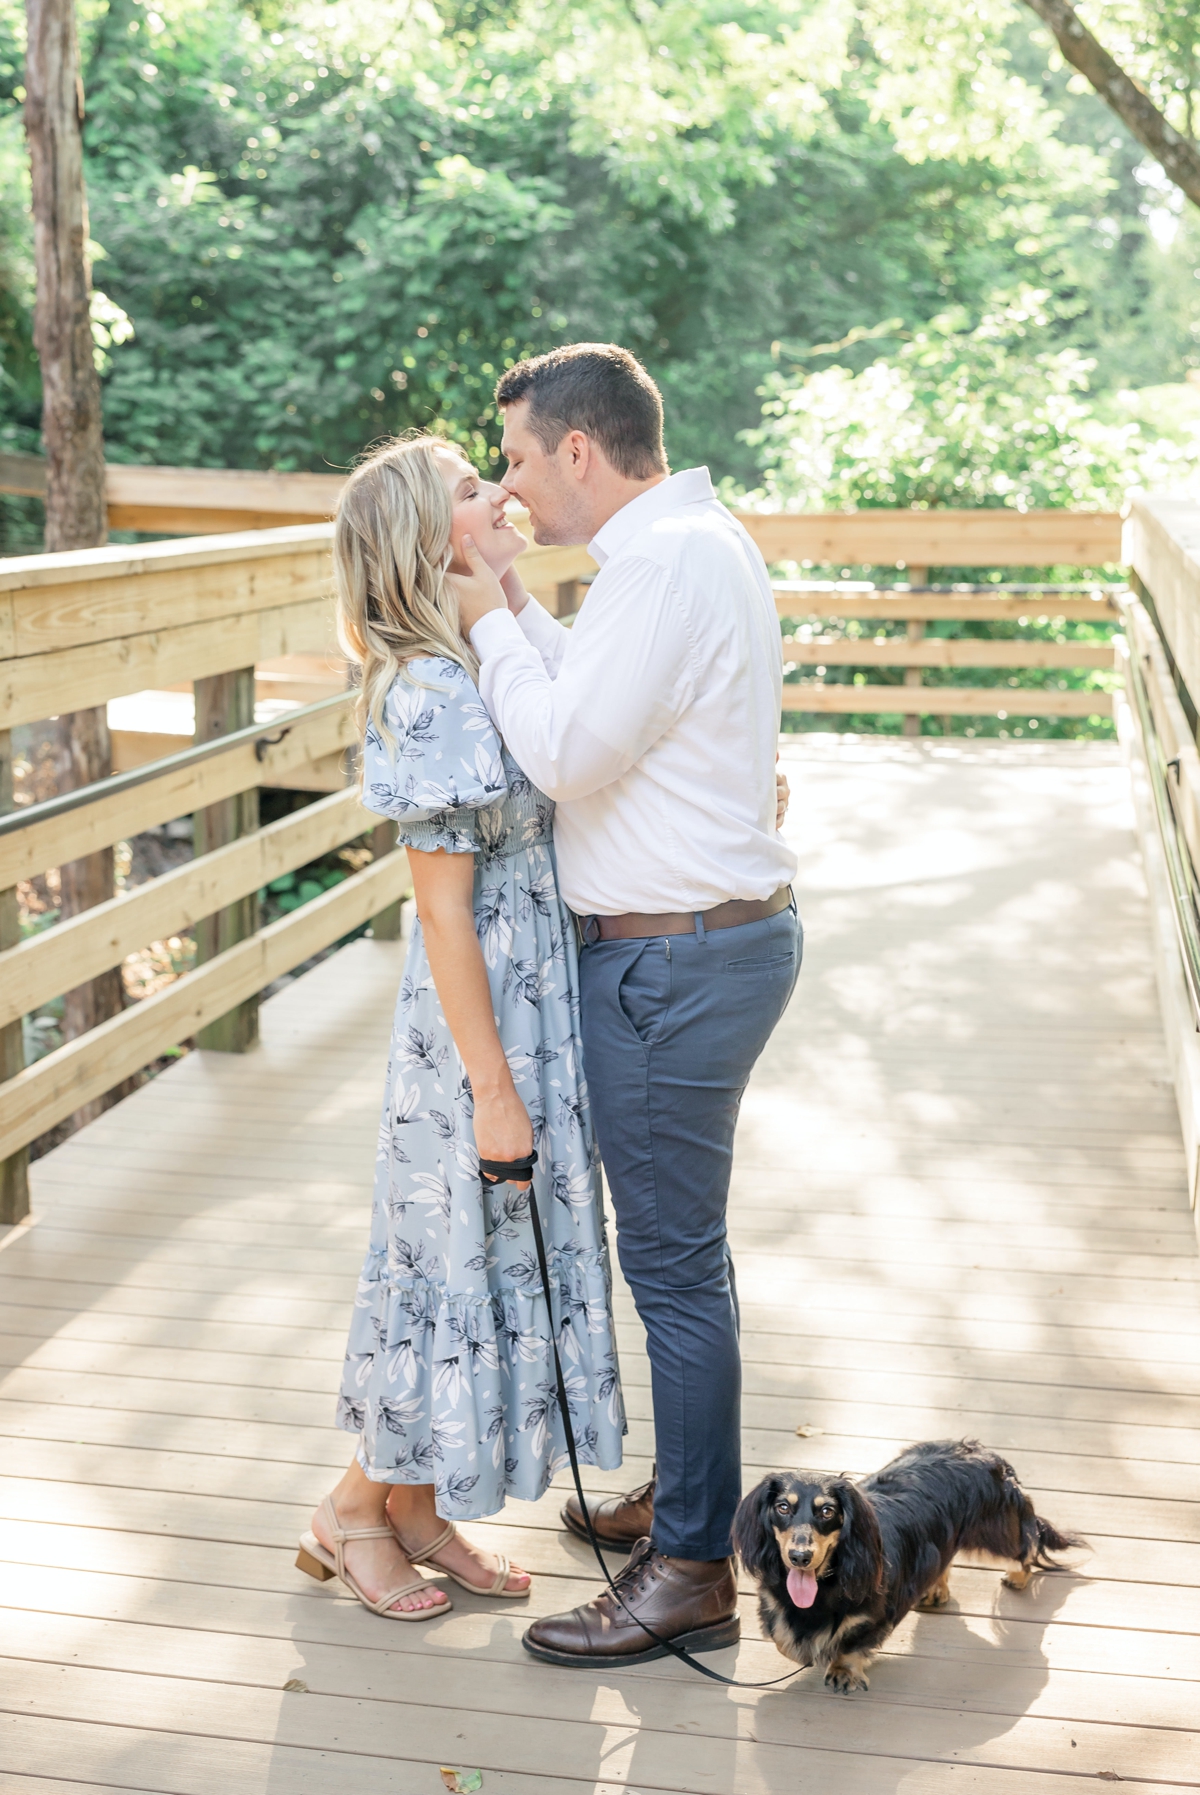 Taylor holding Julia's face while he kisses her during their engagement session.